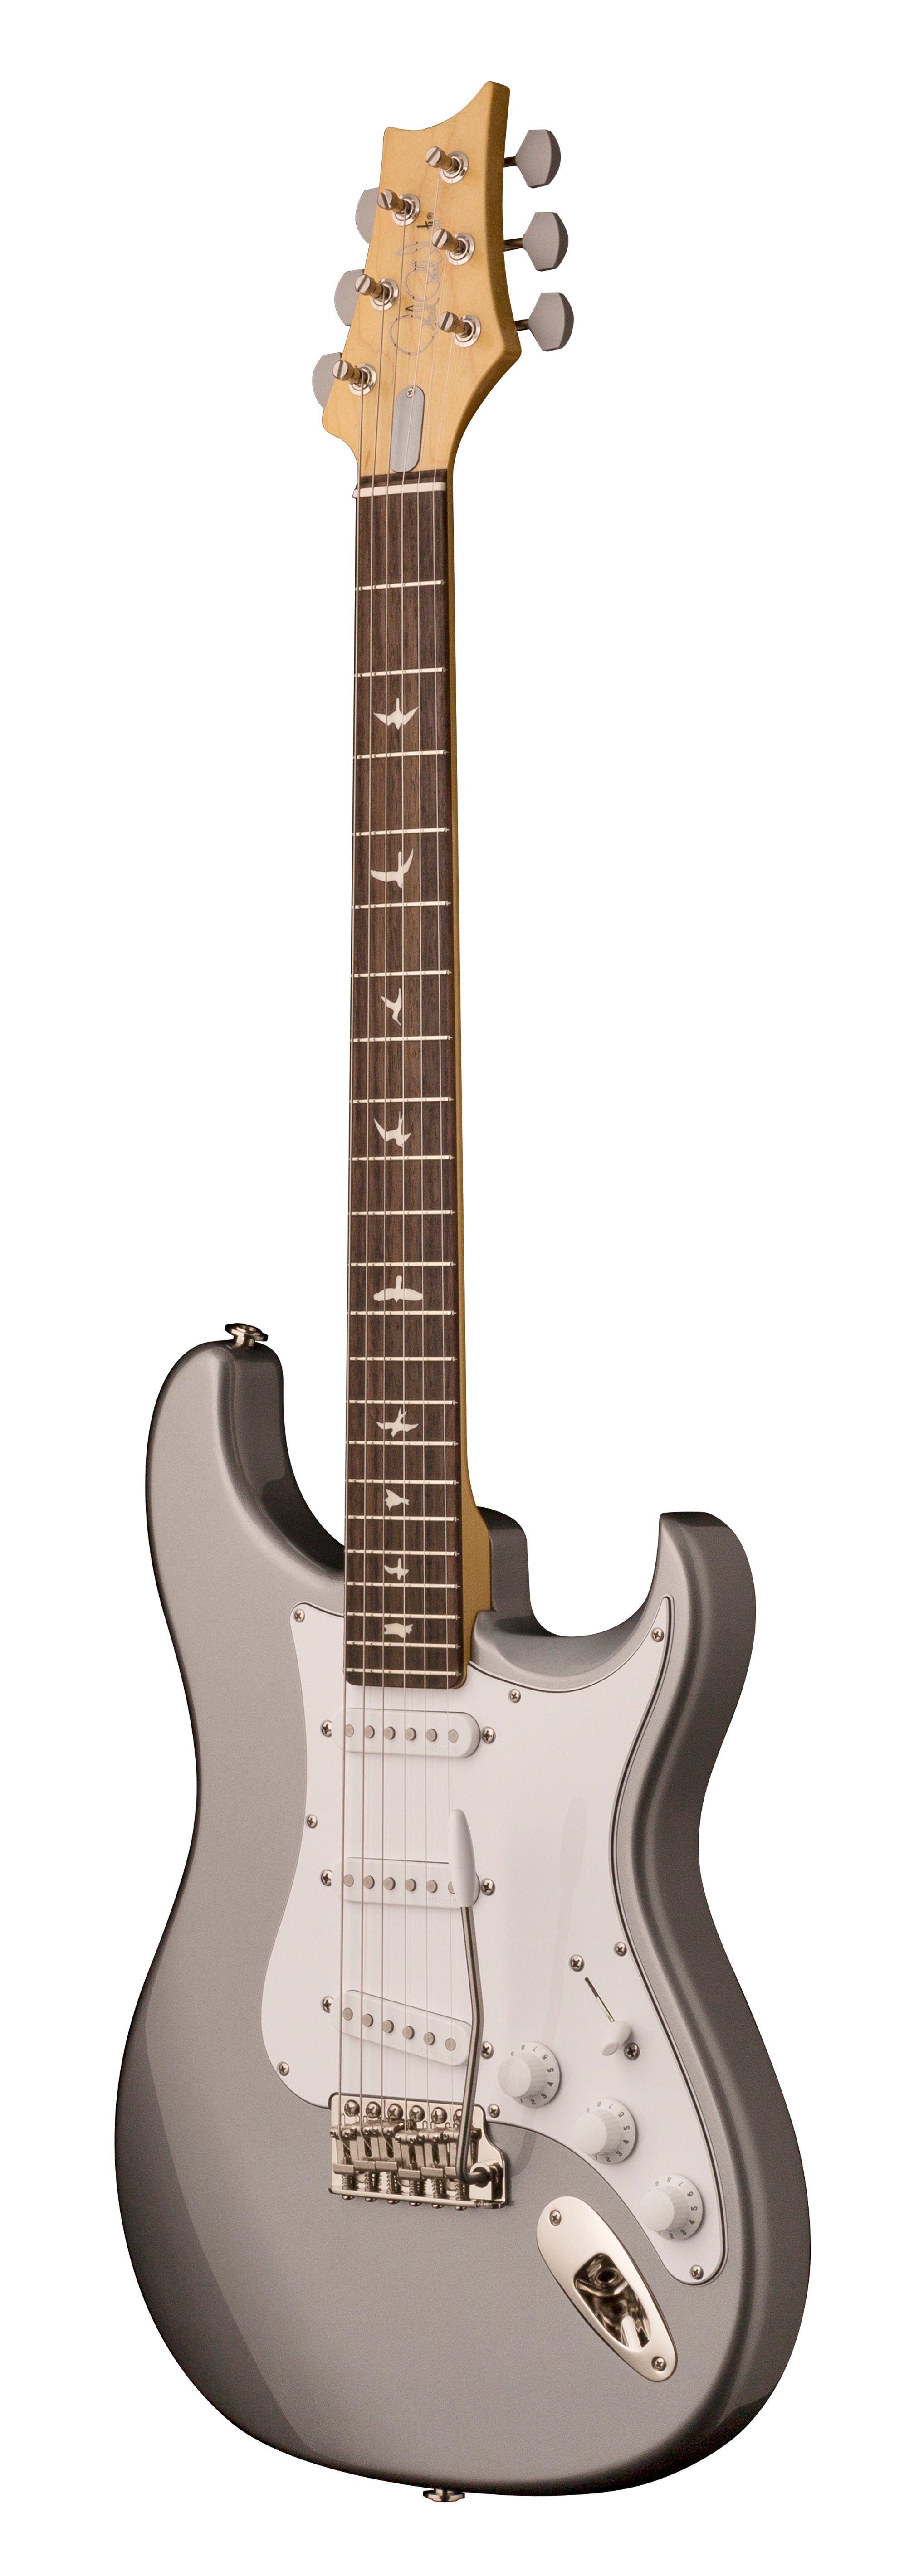 PRS Bolt-On Signature Silver Sky Series Electric Guitar - Rosewood Fretboard (Tungsten)